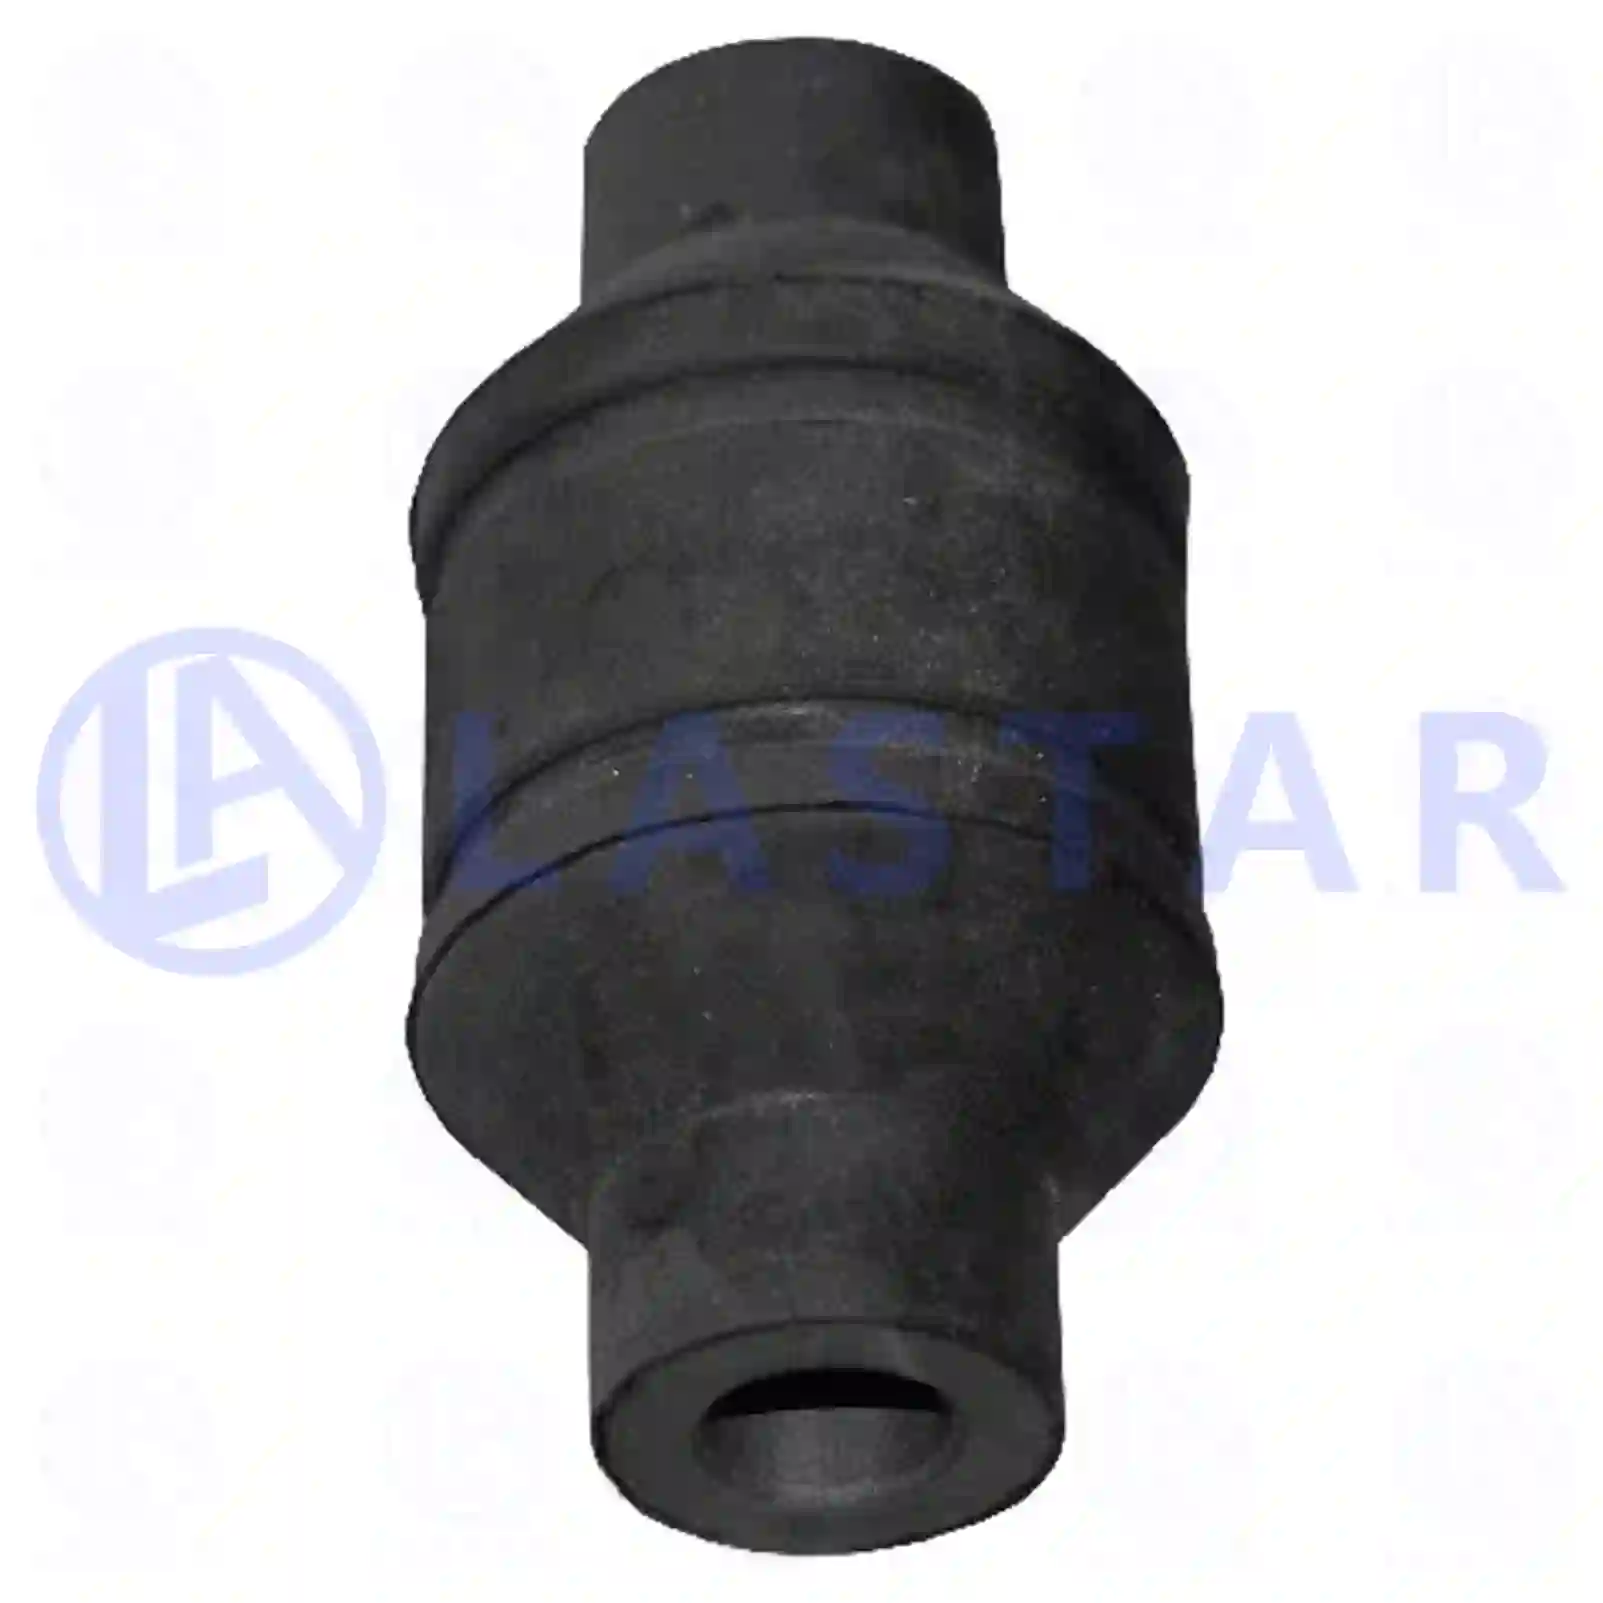 Rubber bushing, shock absorber, 77728184, 0003200644, ZG41475-0008, , ||  77728184 Lastar Spare Part | Truck Spare Parts, Auotomotive Spare Parts Rubber bushing, shock absorber, 77728184, 0003200644, ZG41475-0008, , ||  77728184 Lastar Spare Part | Truck Spare Parts, Auotomotive Spare Parts